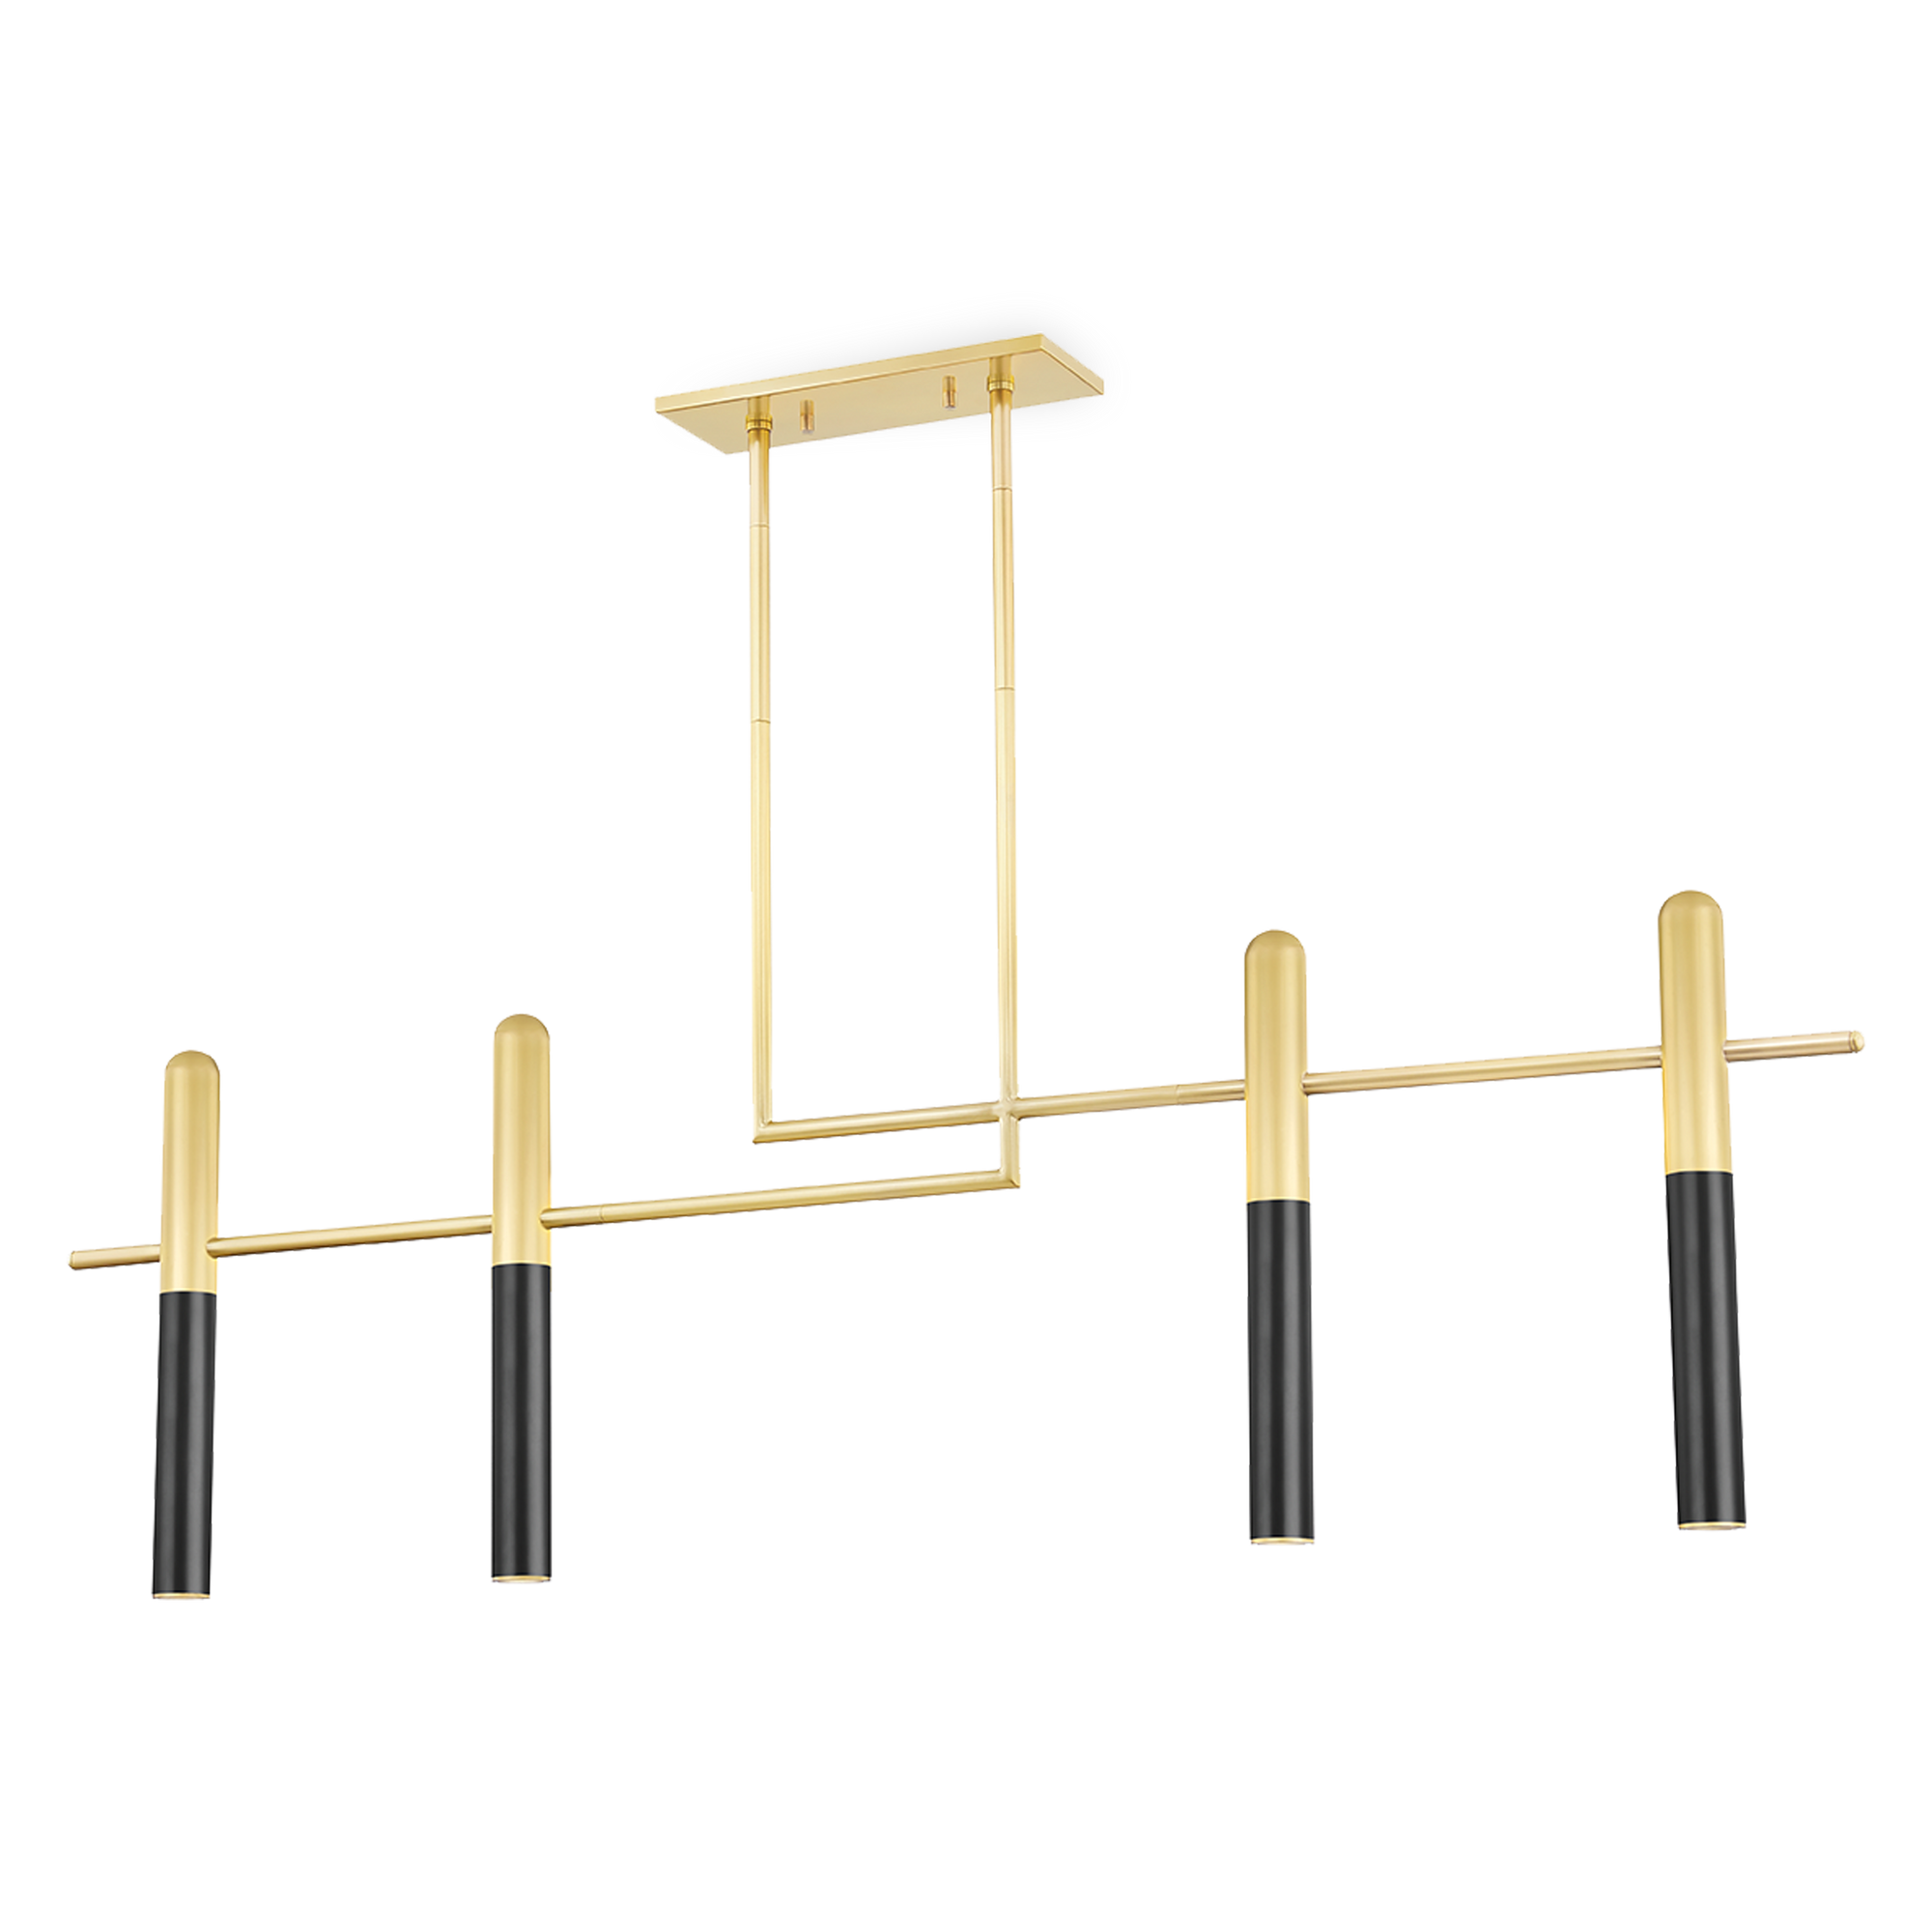 Make a stunning statement with this truly striking fixture.